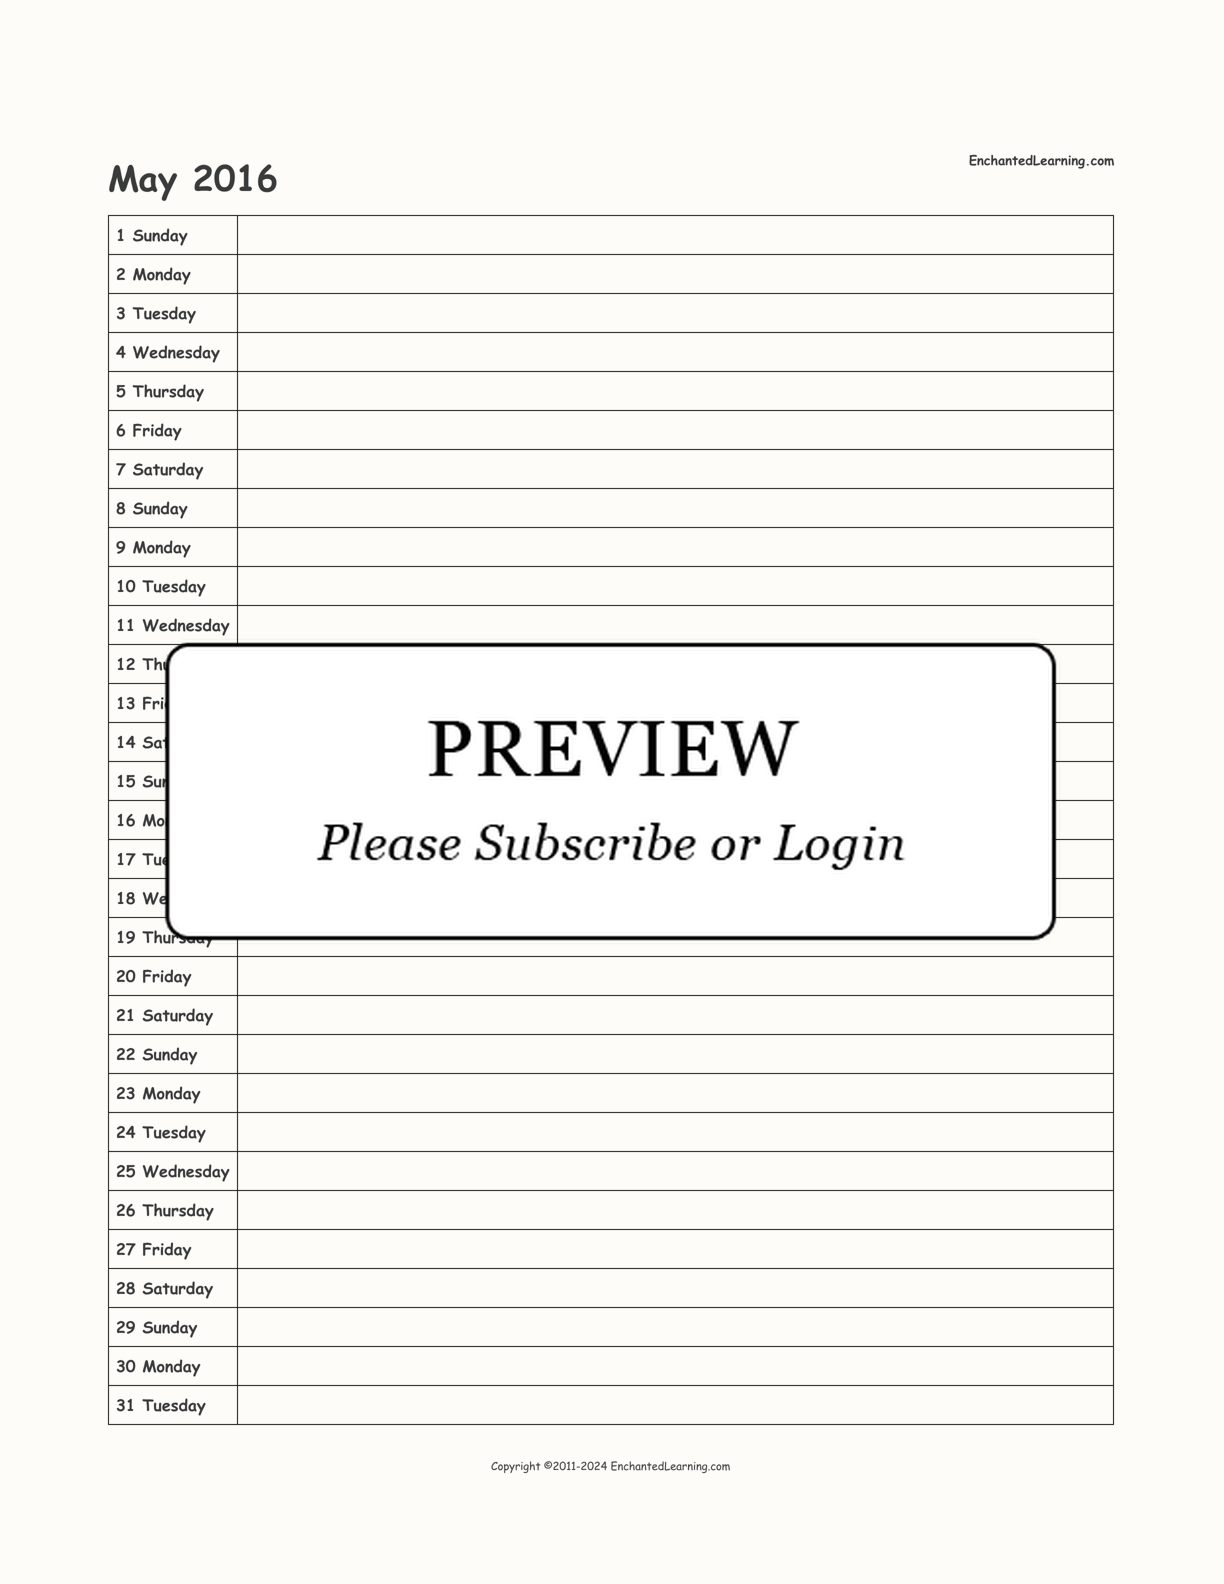 2016 Scheduling Calendar interactive printout page 5